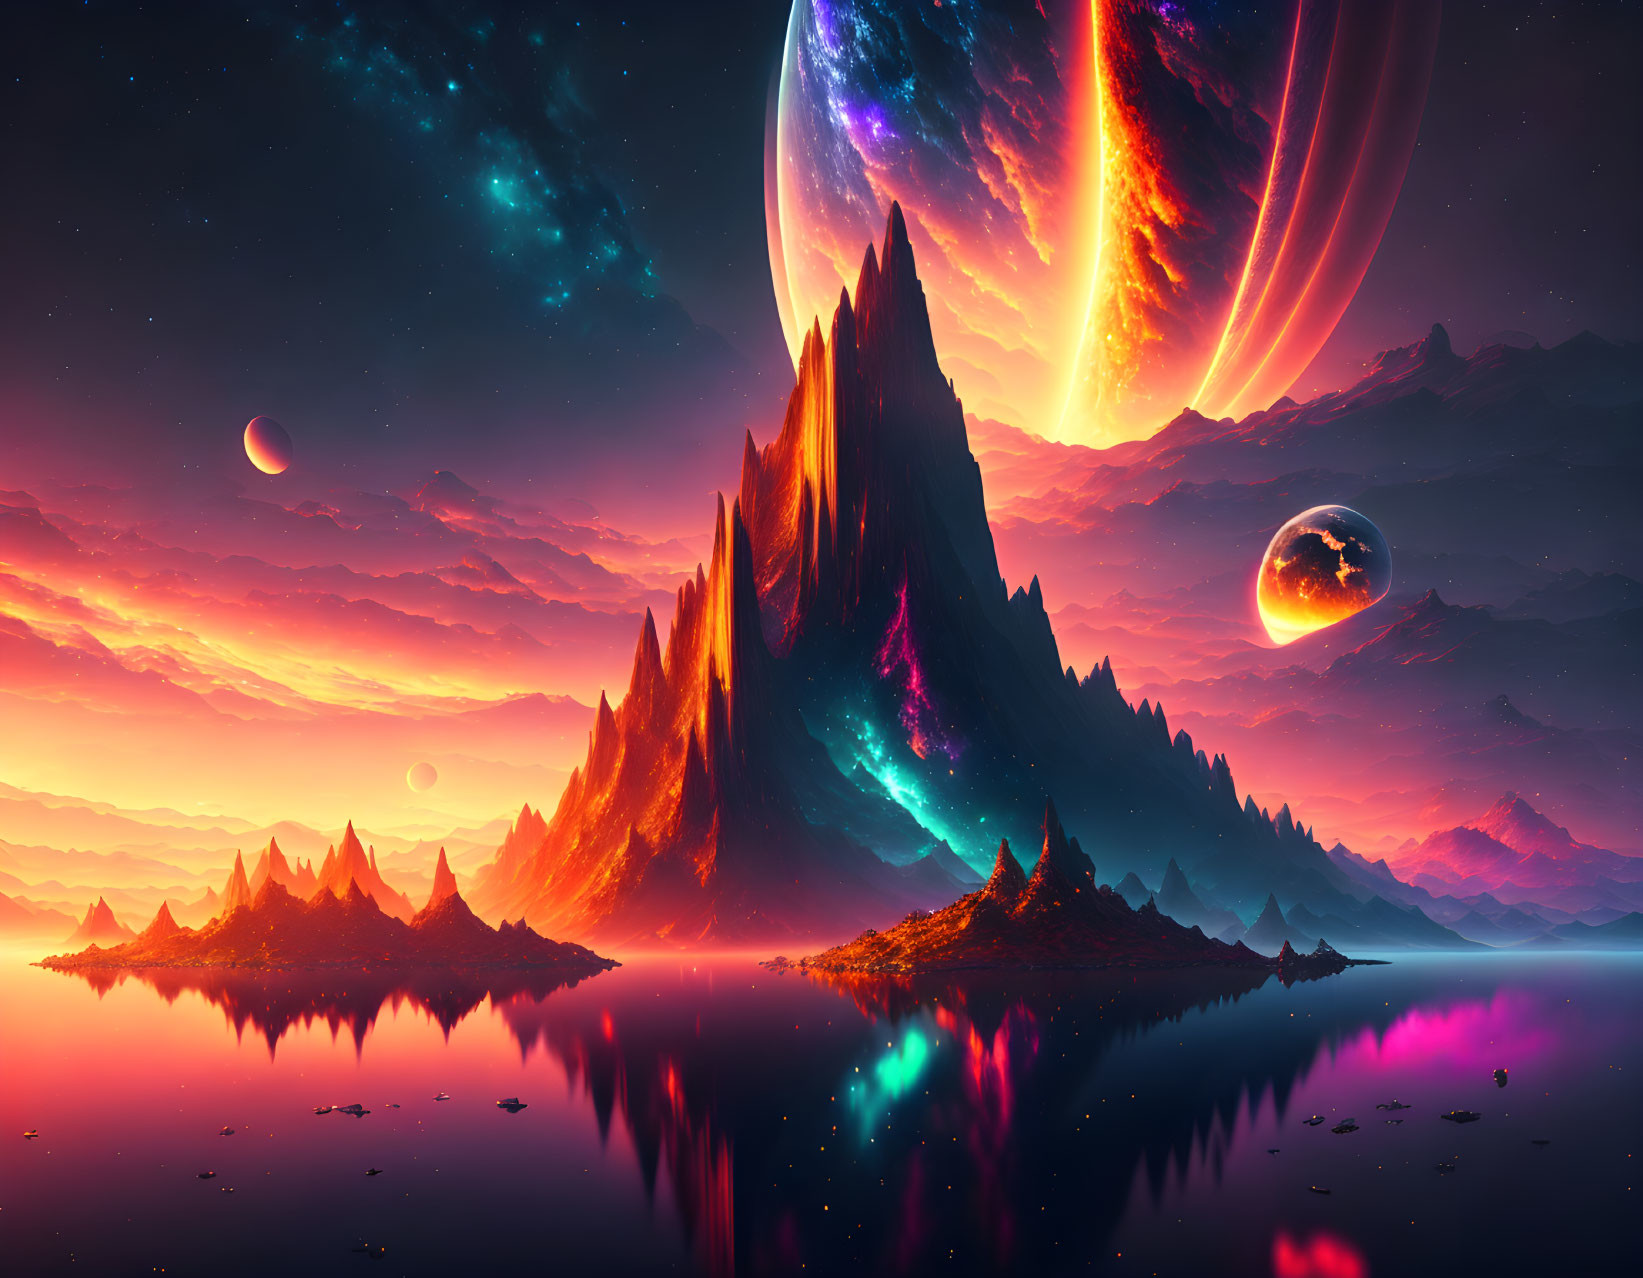 Surreal landscape with mountains, planets, and colorful sky